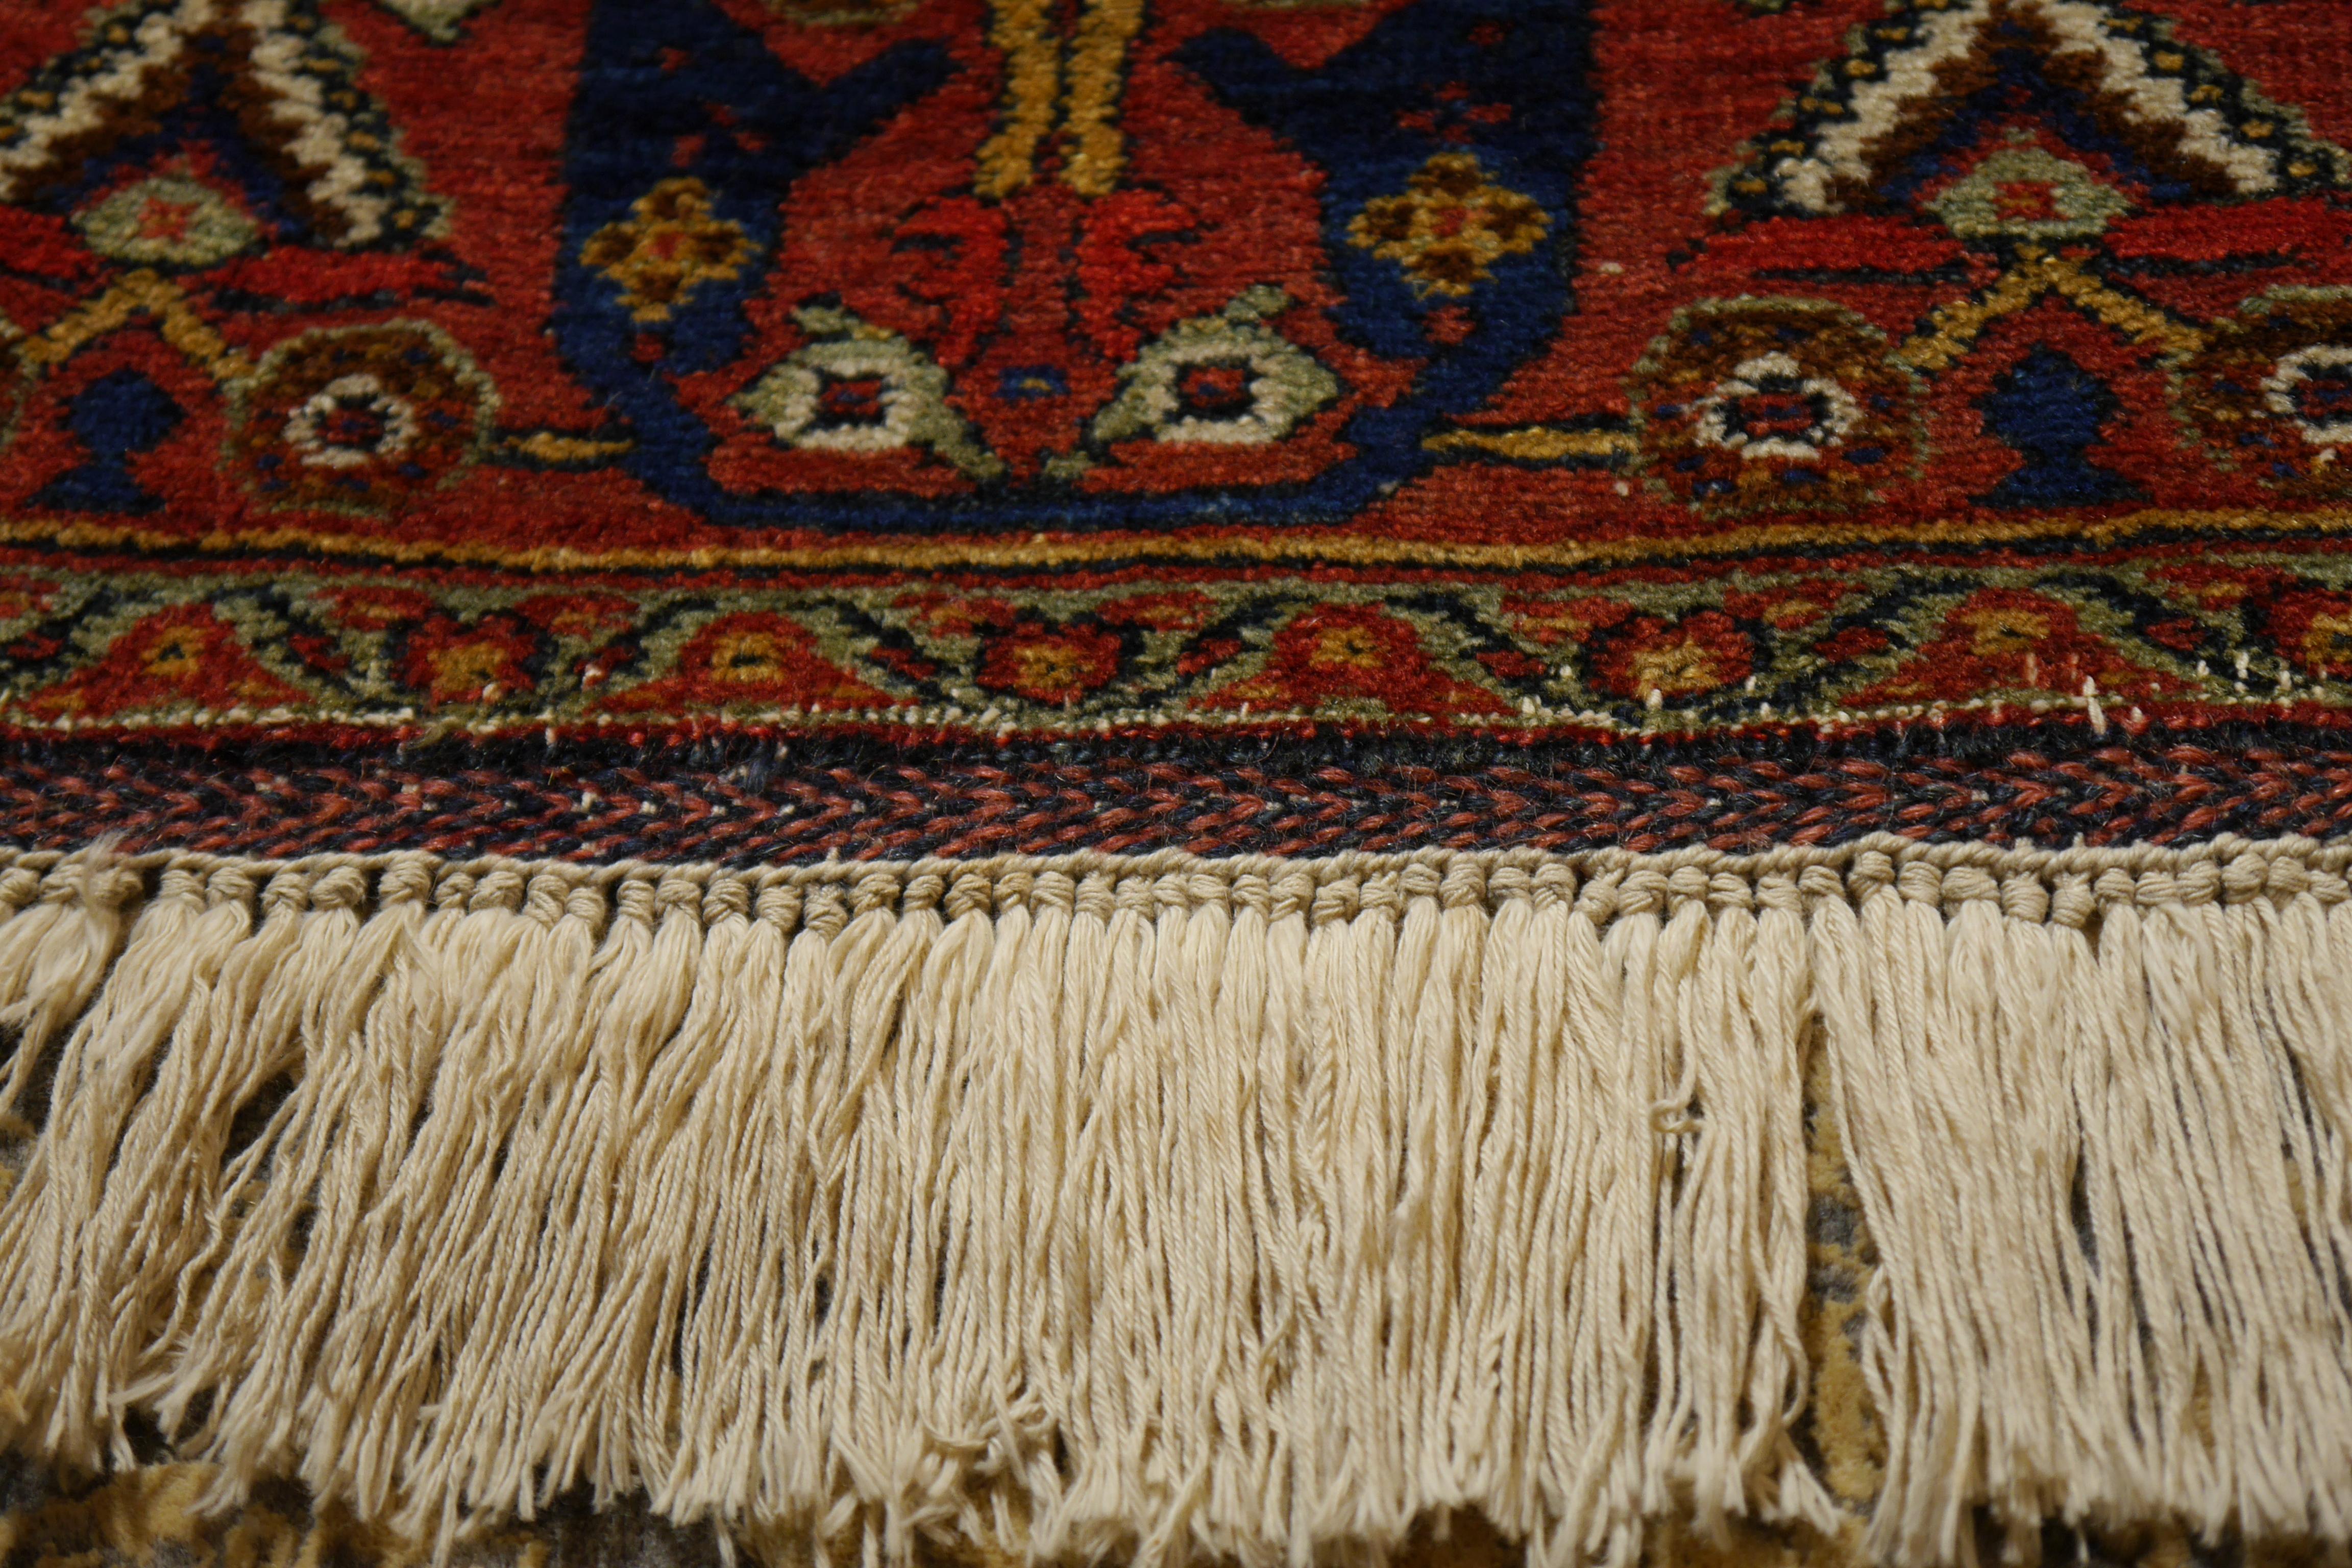 Afshari antique rug  6.8 x 4.8 ft natural color Bothe design blue rust
Antique nomadic carpet, hand-knotted from wool.
Afshar rugs are knotted by the Afshar tribe people in Southeast Persia.
In the desert region between the oasis town of Kerman /